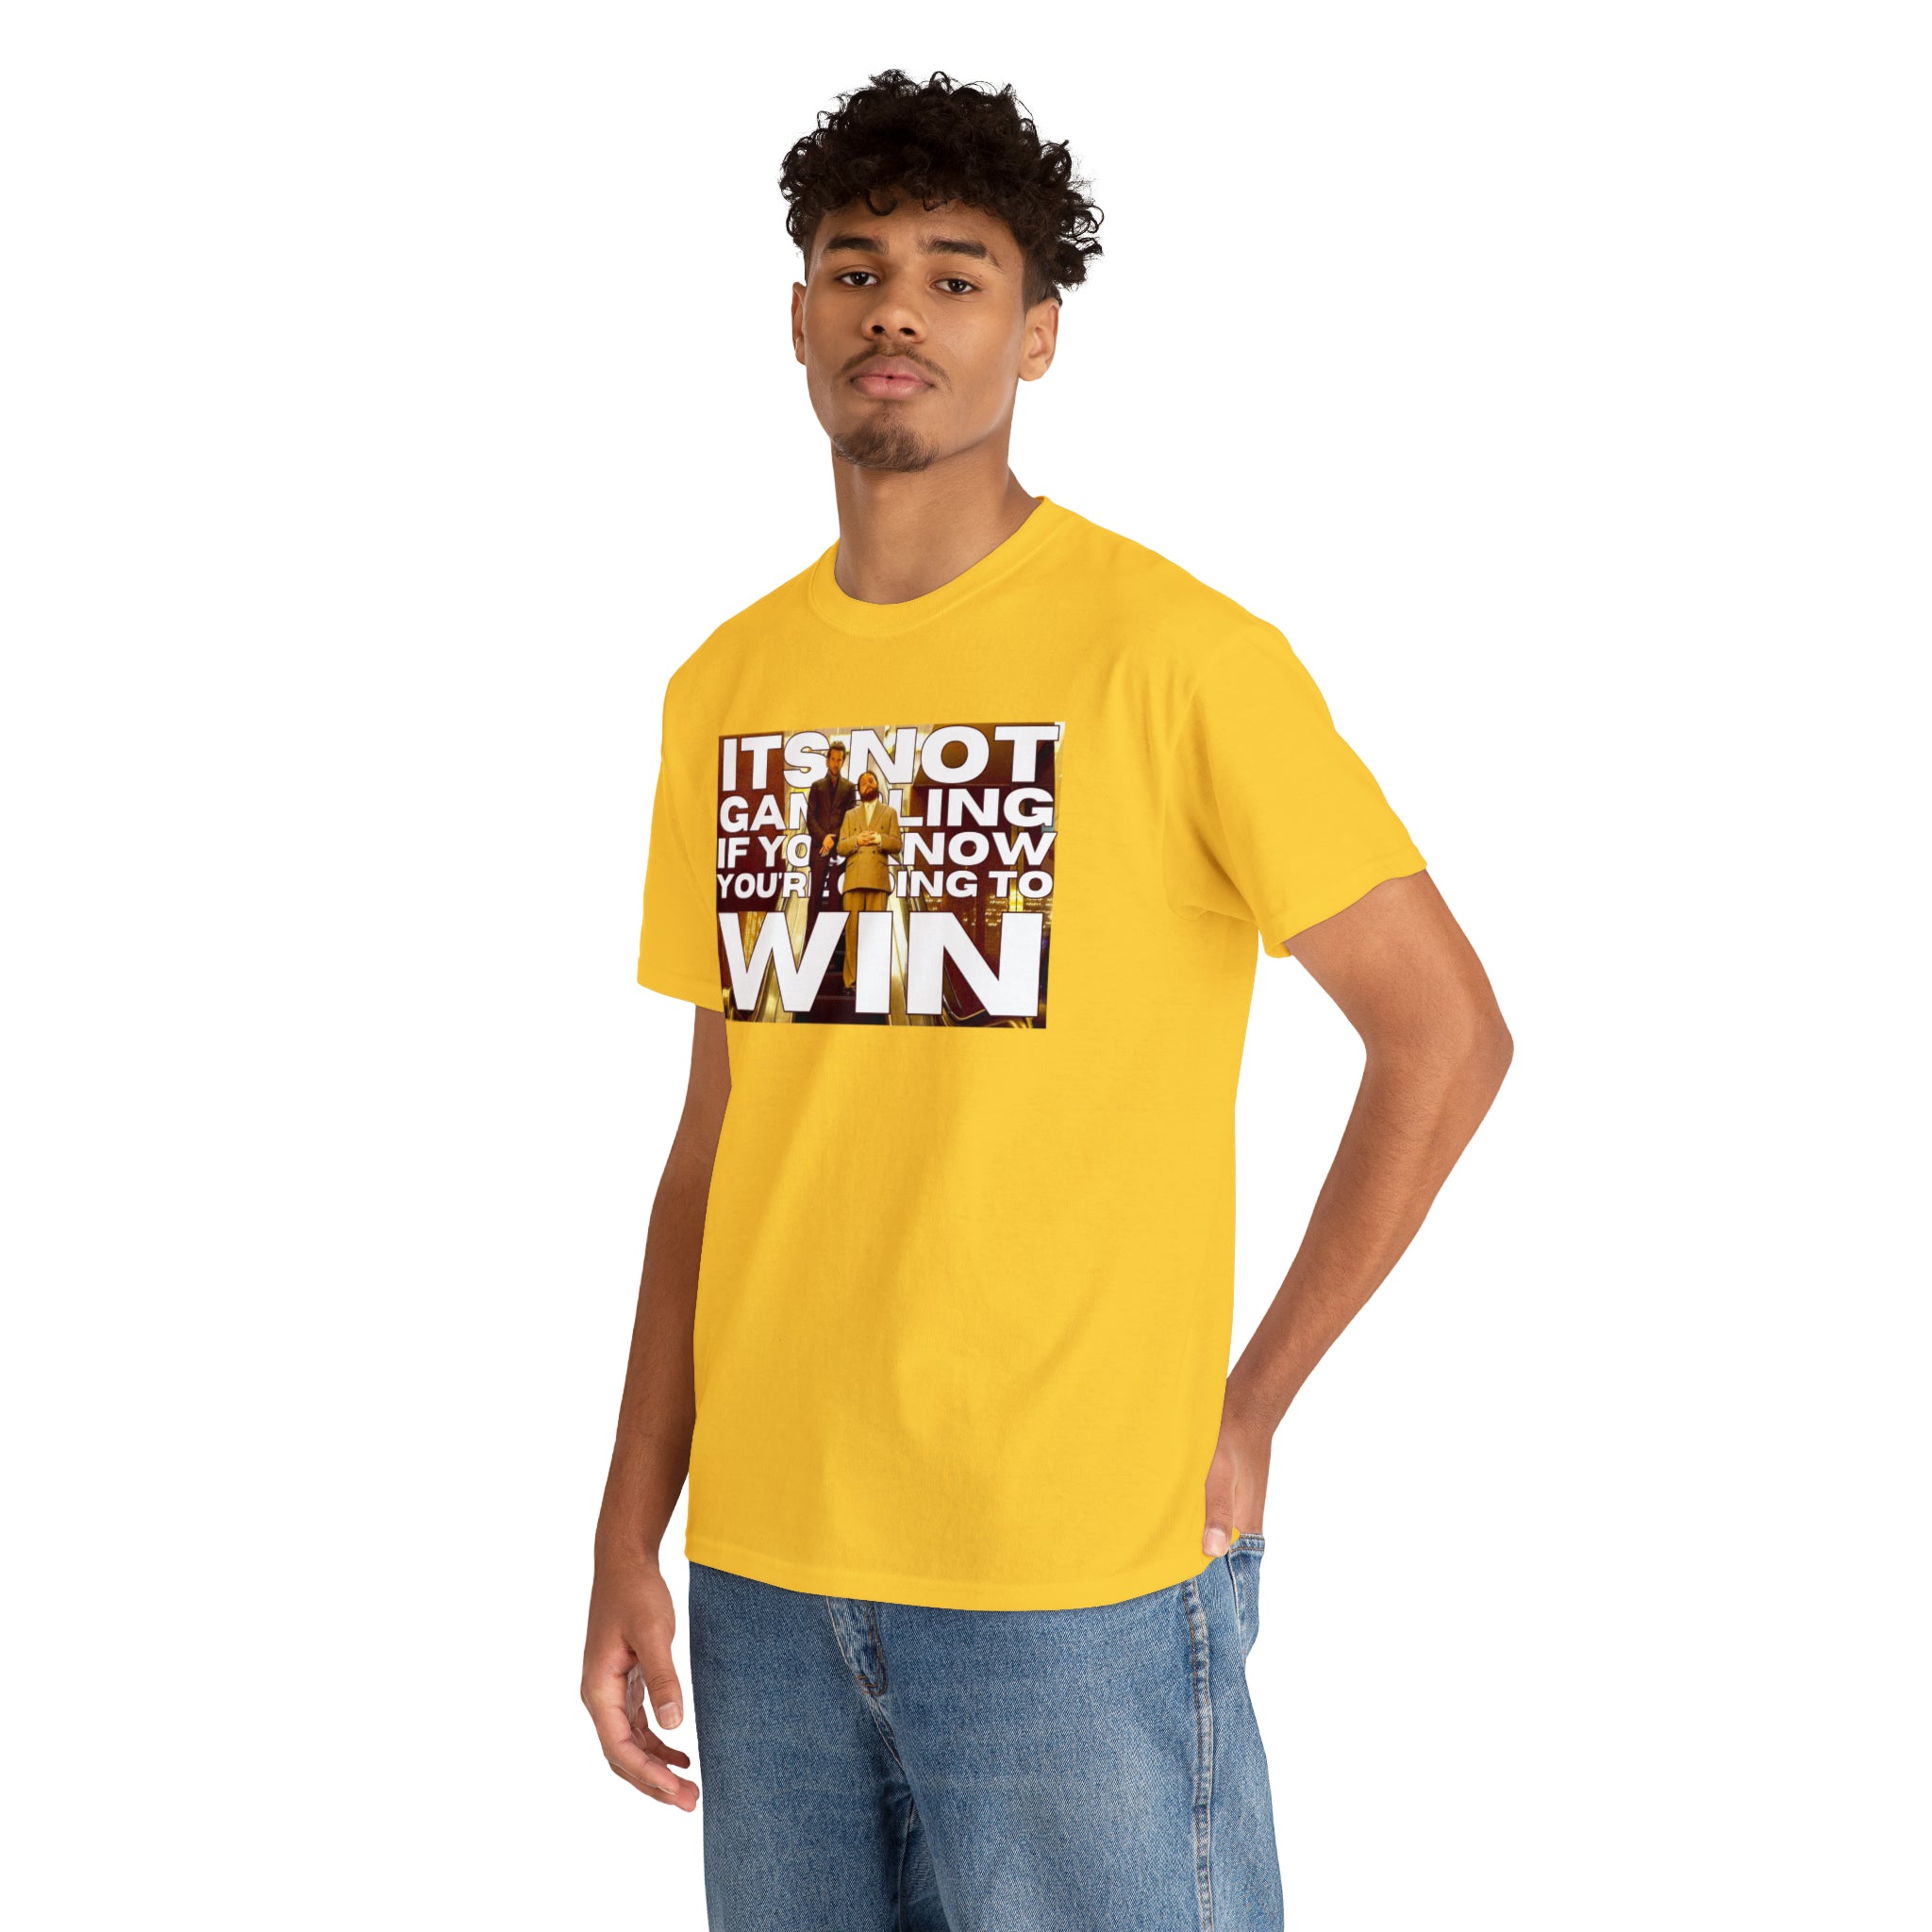 "It's not Gambling if you know you're going to win" Allen Hangover Movie - Unisex Heavy Cotton Tee